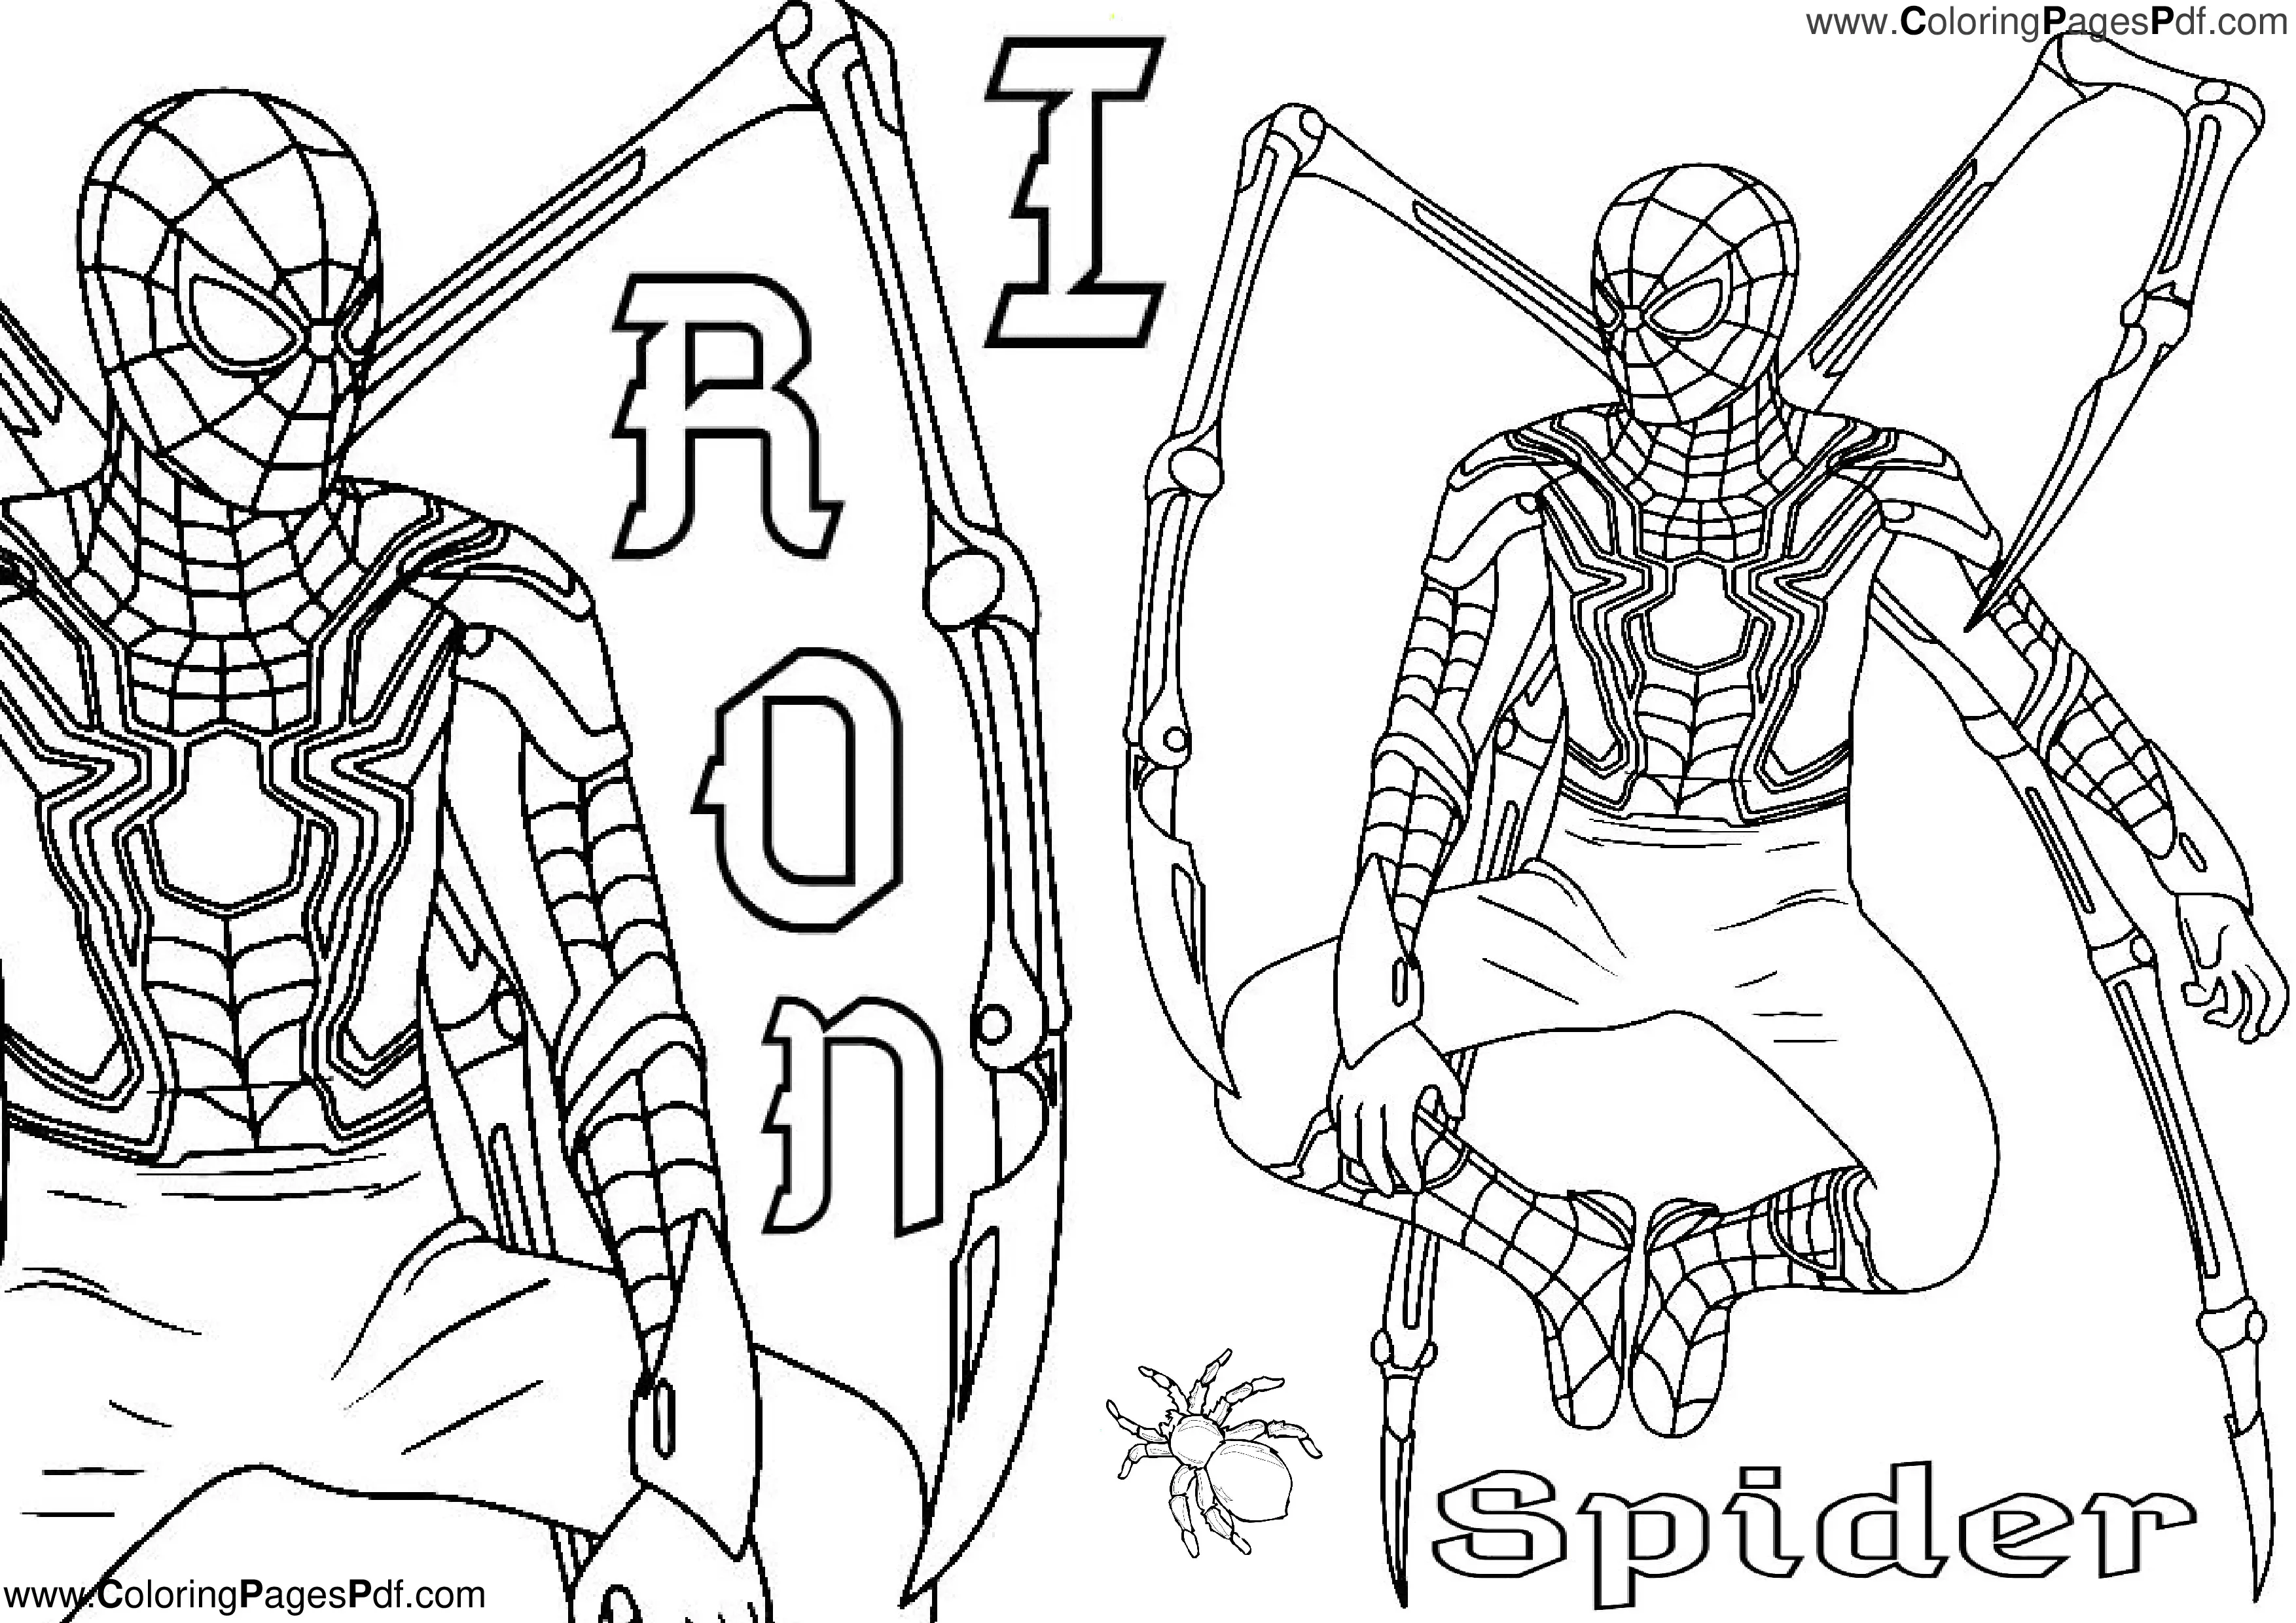 spider printable coloring pages,spider coloring page printable,spider coloring pages to print,coloring sheets,color by number printable,heart coloring page,printable coloring sheets,bluey coloring page